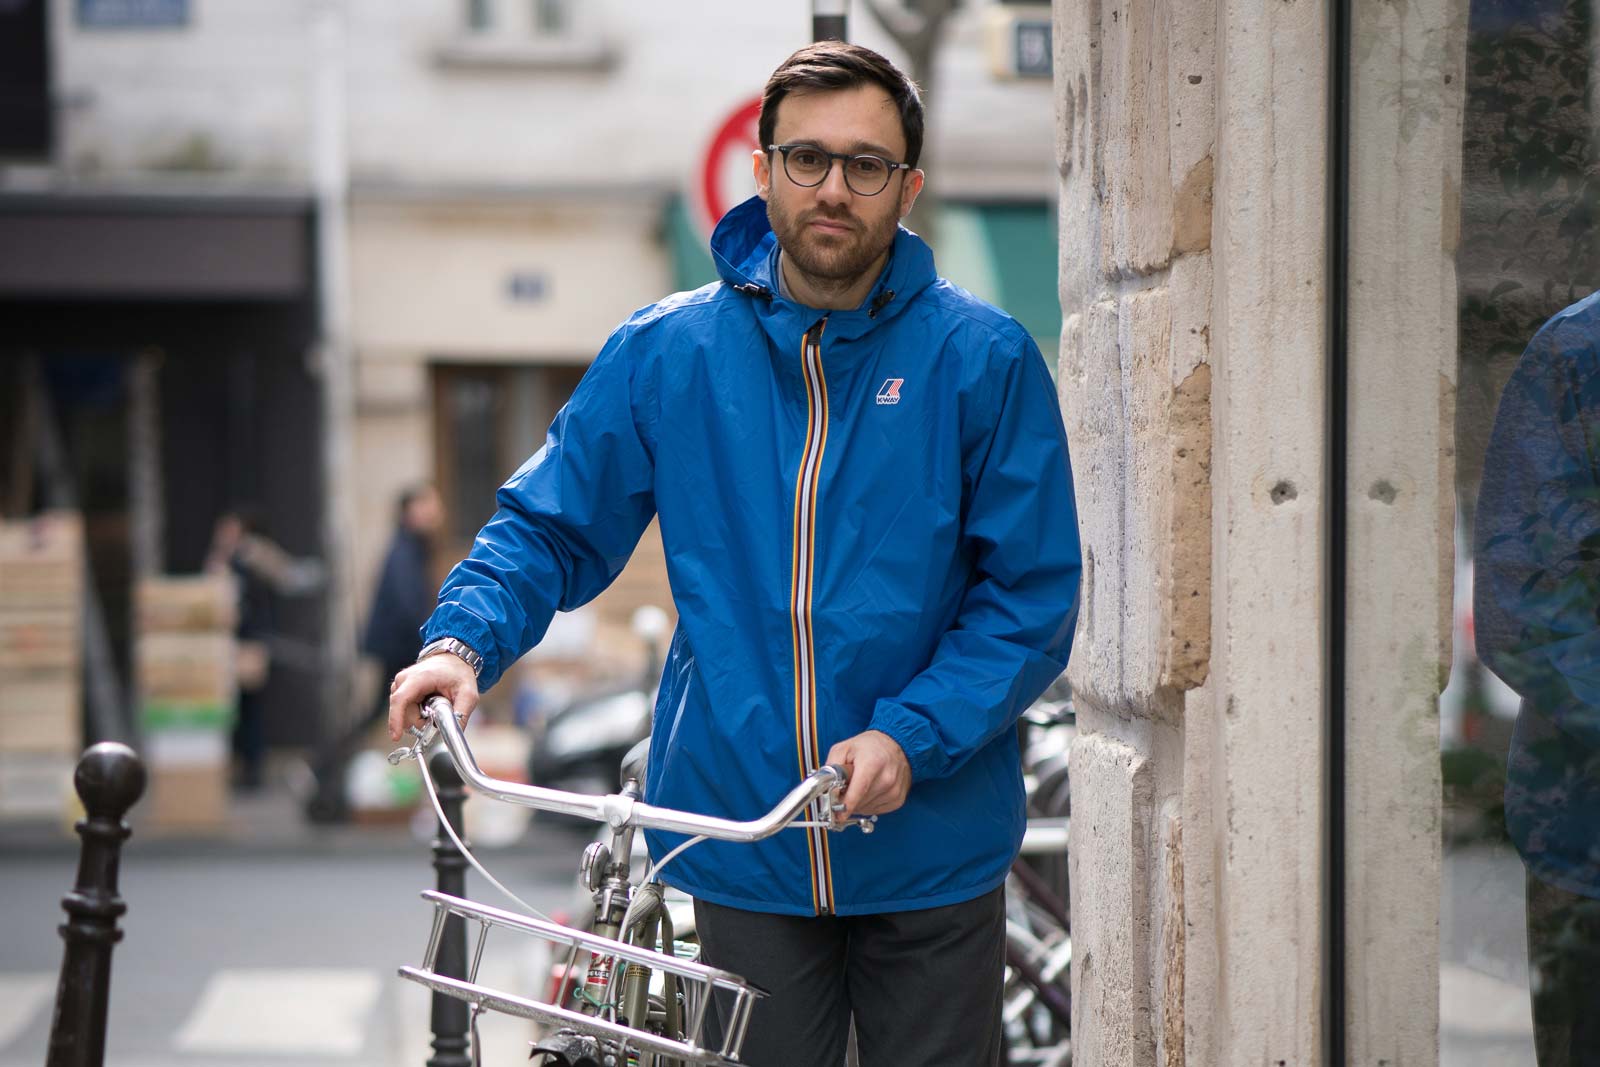 Men wearing a Claude Amiable Recycled and Sustainable Jacket in Blue Royal while walking next to his bike in a city street.